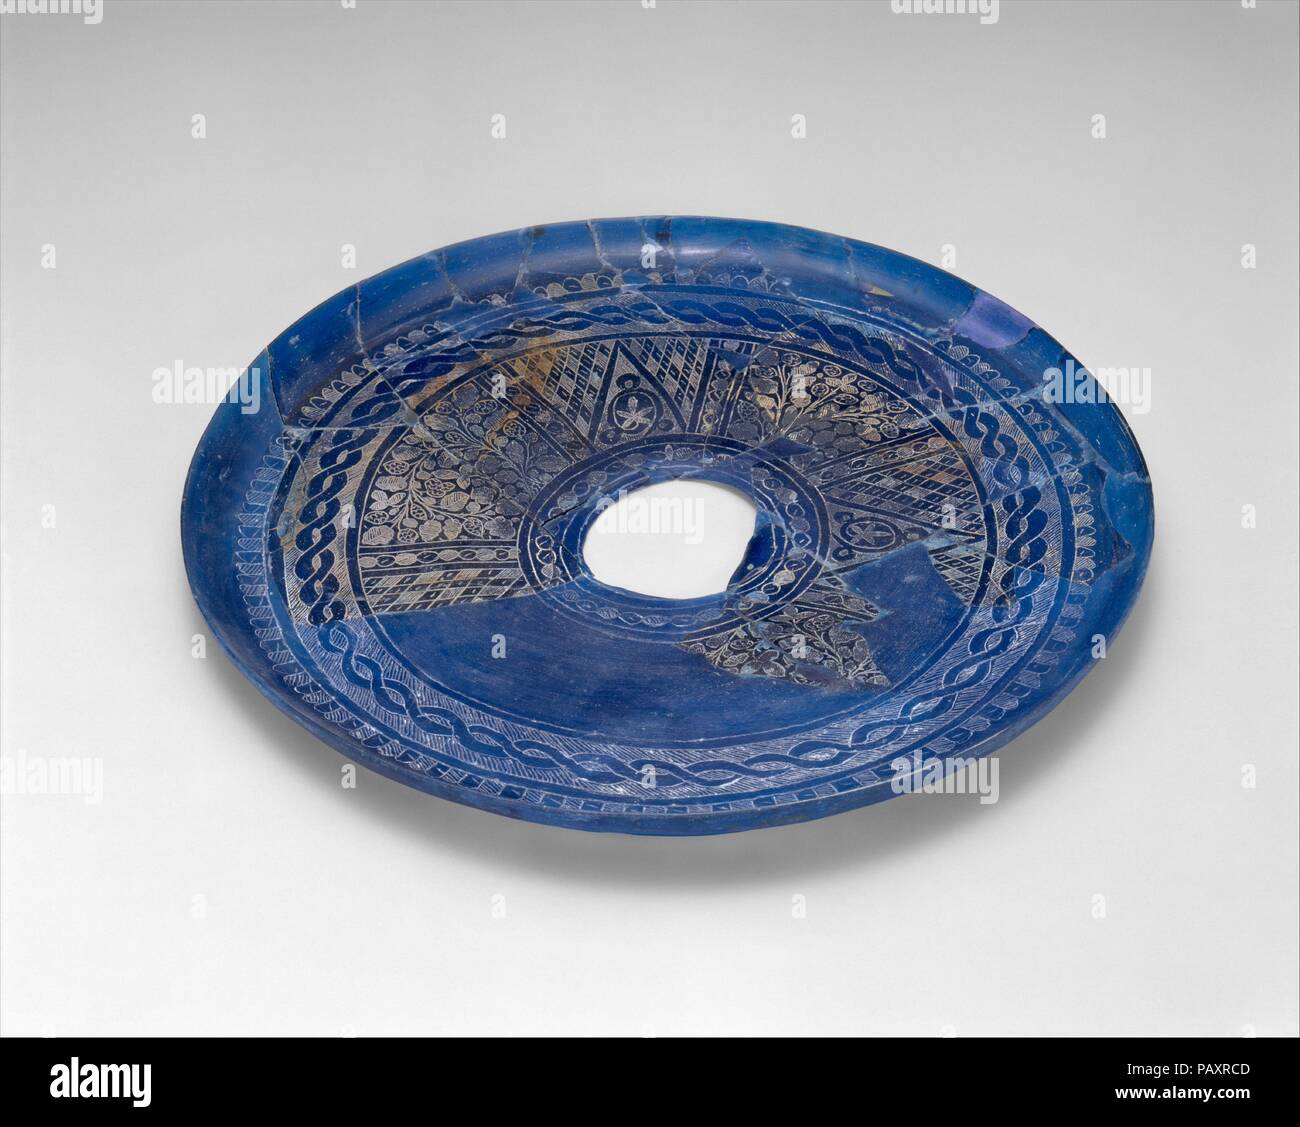 Fragmentary Plate with Engraved Designs. Dimensions: H. ca. 9/16 in. (ca. 1.5 cm)  Diam. 11 in. (28 cm). Date: 9th century.  The striking blue color of this plate was achieved by adding cobalt to the glass fabric, and its surface has been engraved with various patterns arranged in concentric registers around a central roundel. The circular hole at the center indicates the place where a foot was once attached. This plate is important evidence of the active glass trade from west to east during the ninth and tenth centuries. Probably made in Syria, it was imported to Nishapur where it was found i Stock Photo